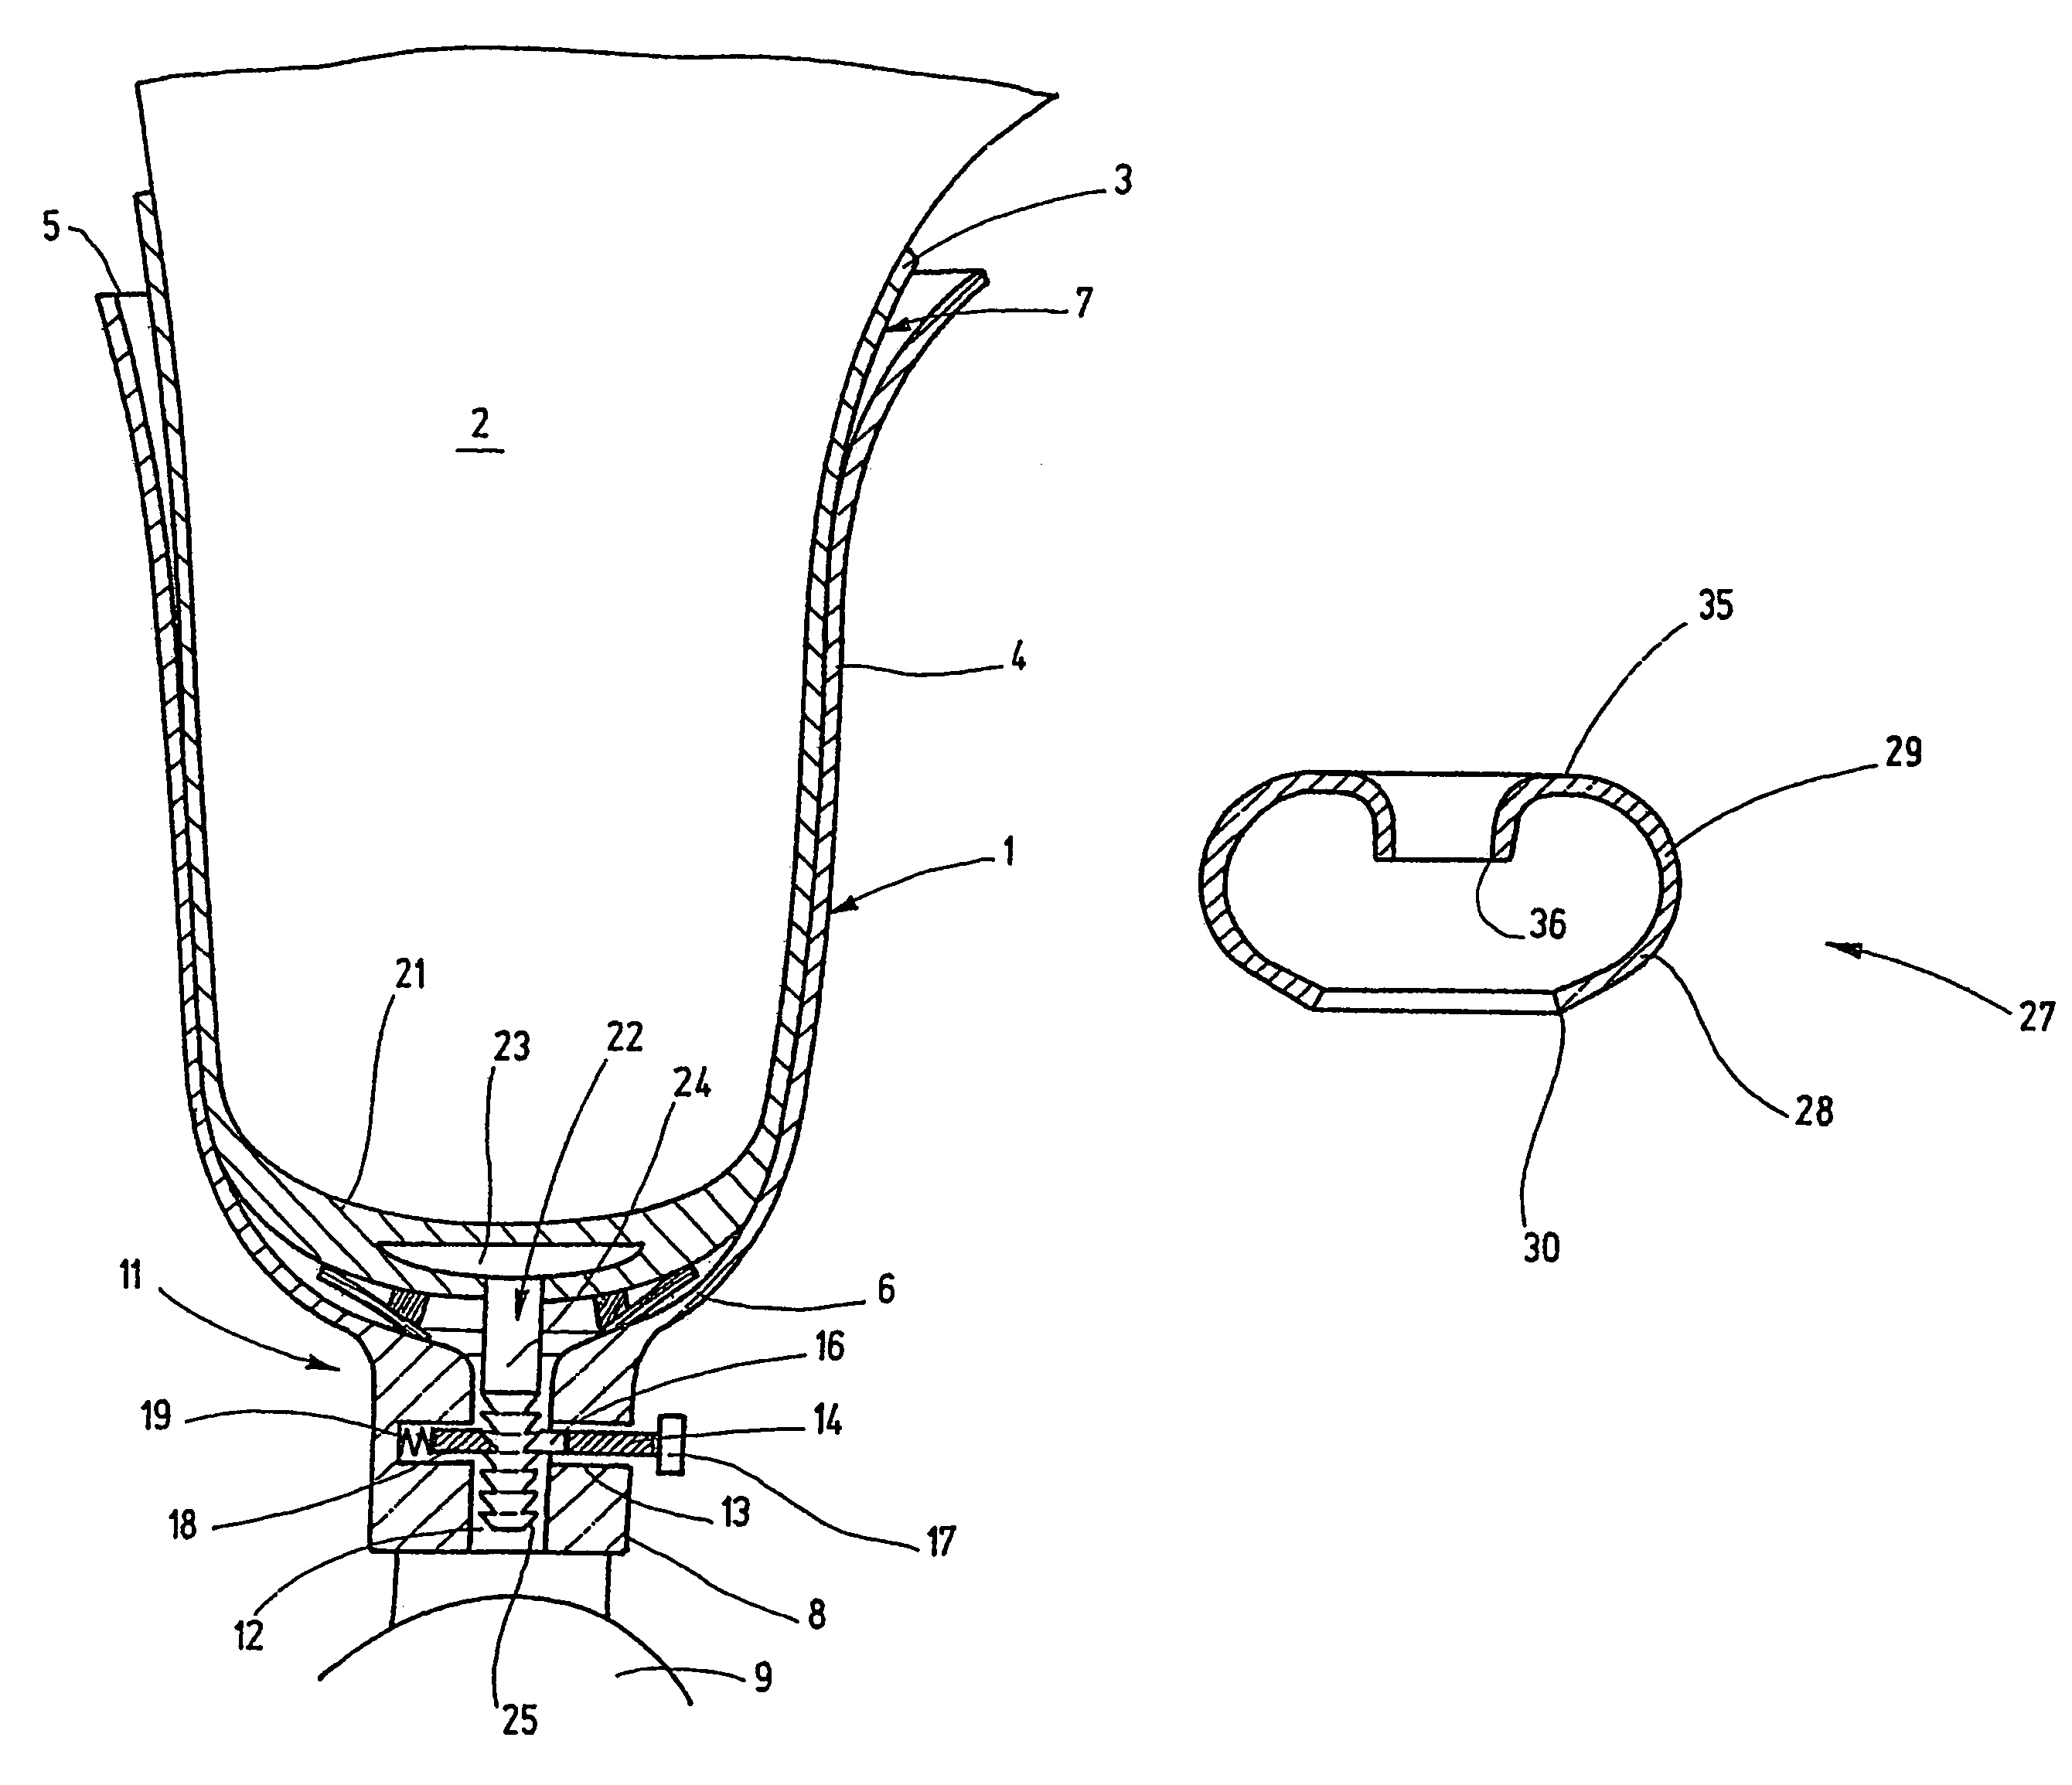 Prosthesis liner or socket with a seal at the distal end